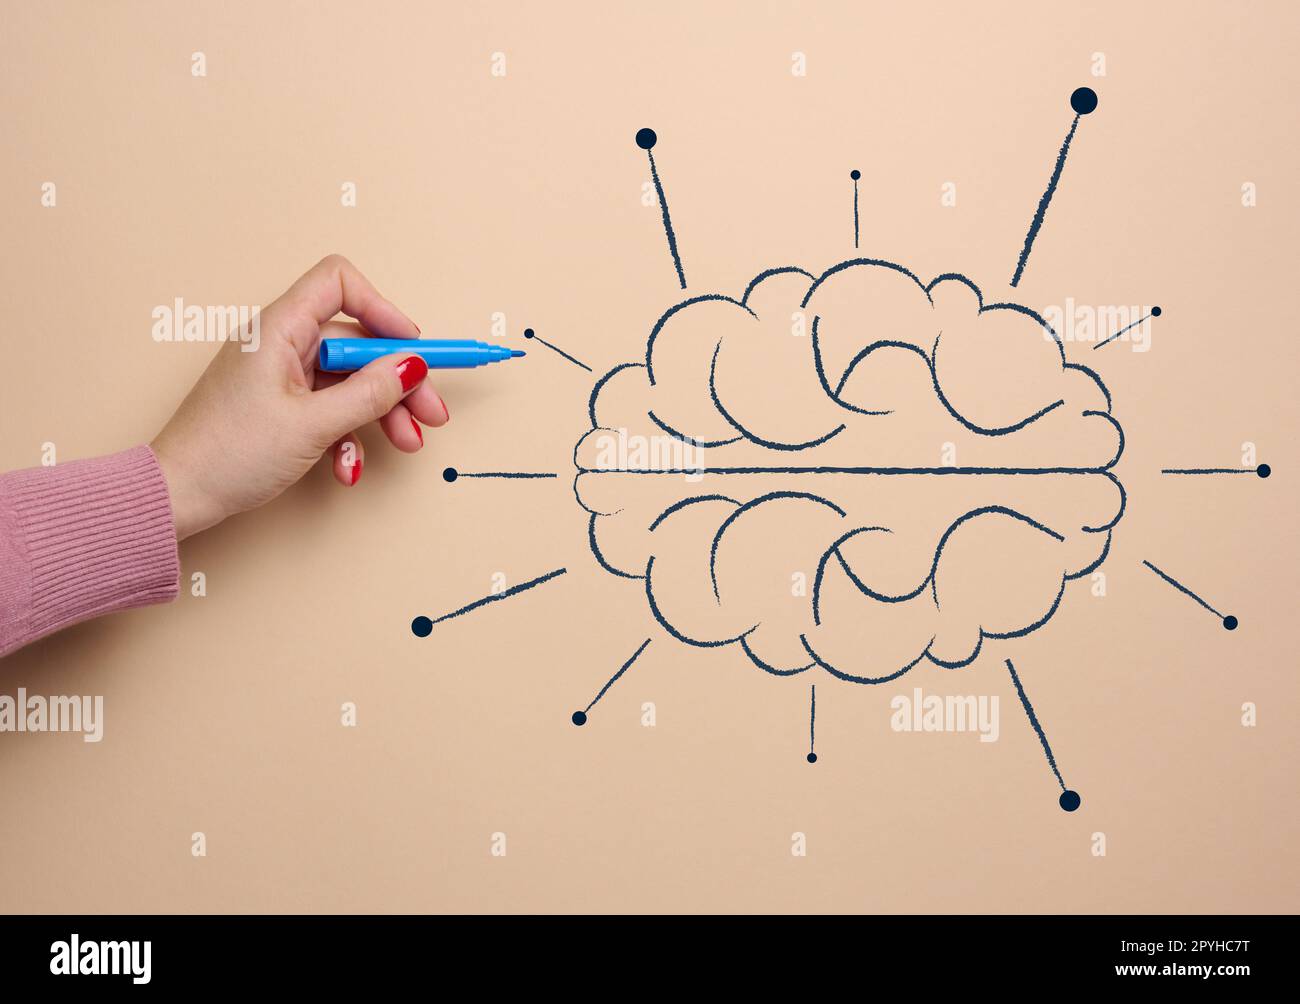 Human brain drawn with marker, concept of learning artificial intelligence by adding information Stock Photo